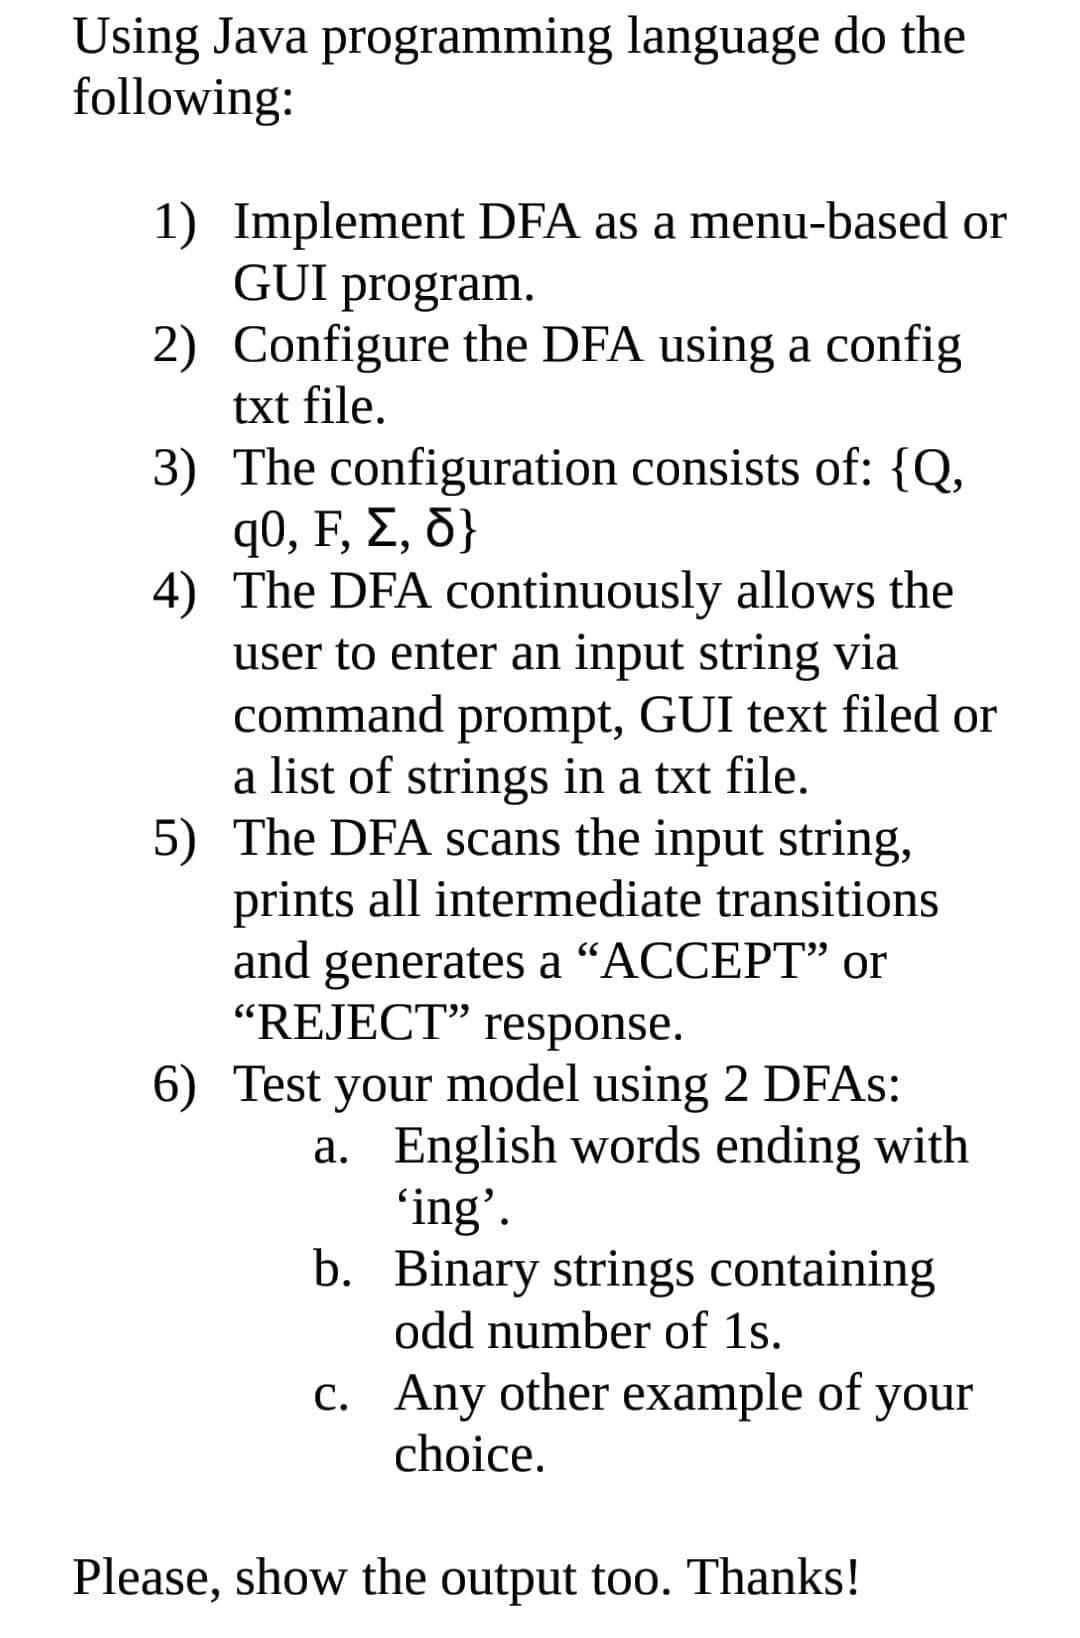 Using Java programming language do the
following:
1) Implement DFA as a menu-based or
GUI program.
2) Configure the DFA using a config
txt file.
3) The configuration consists of: {Q,
q0, F, Σ, δ;
4) The DFA continuously allows the
user to enter an input string via
command prompt, GUI text filed or
a list of strings in a txt file.
5) The DFA scans the input string,
prints all intermediate transitions
and generates a “ACCEPT" or
"REJECT" response.
6) Test your model using 2 DFAS:
a. English words ending with
'ing'.
b. Binary strings containing
odd number of 1s.
c. Any other example of your
choice.
Please, show the output too. Thanks!
